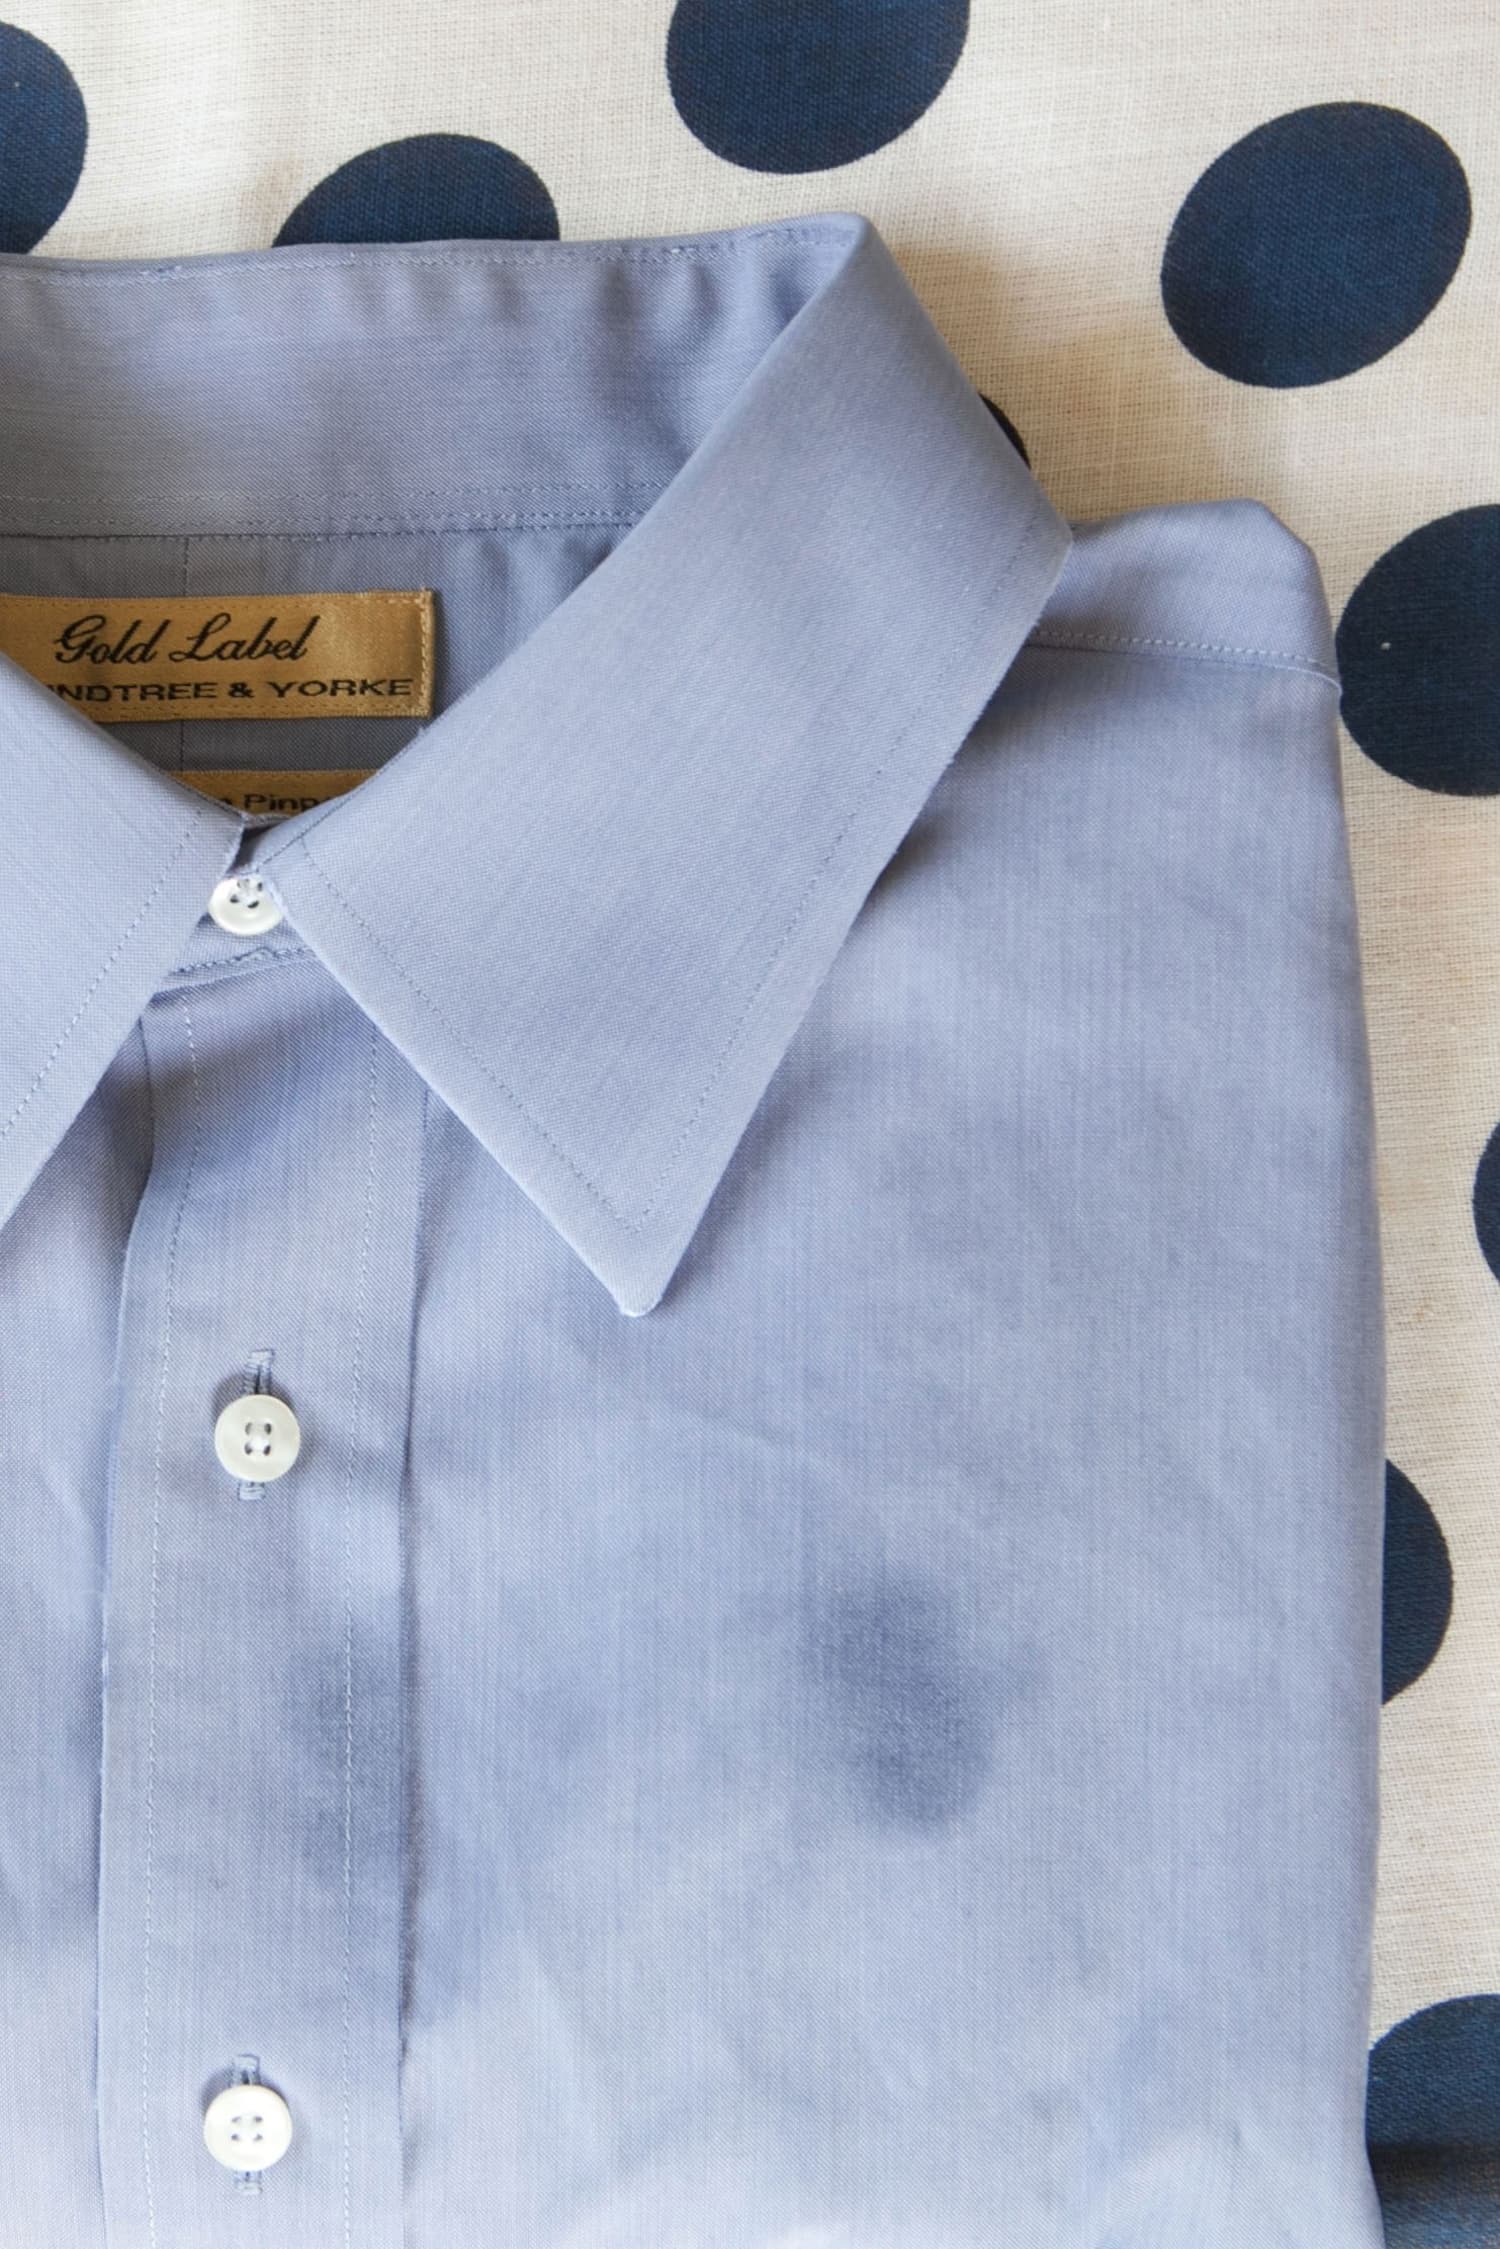 How To Get Grease Stains Out Of Clothes | Kitchn